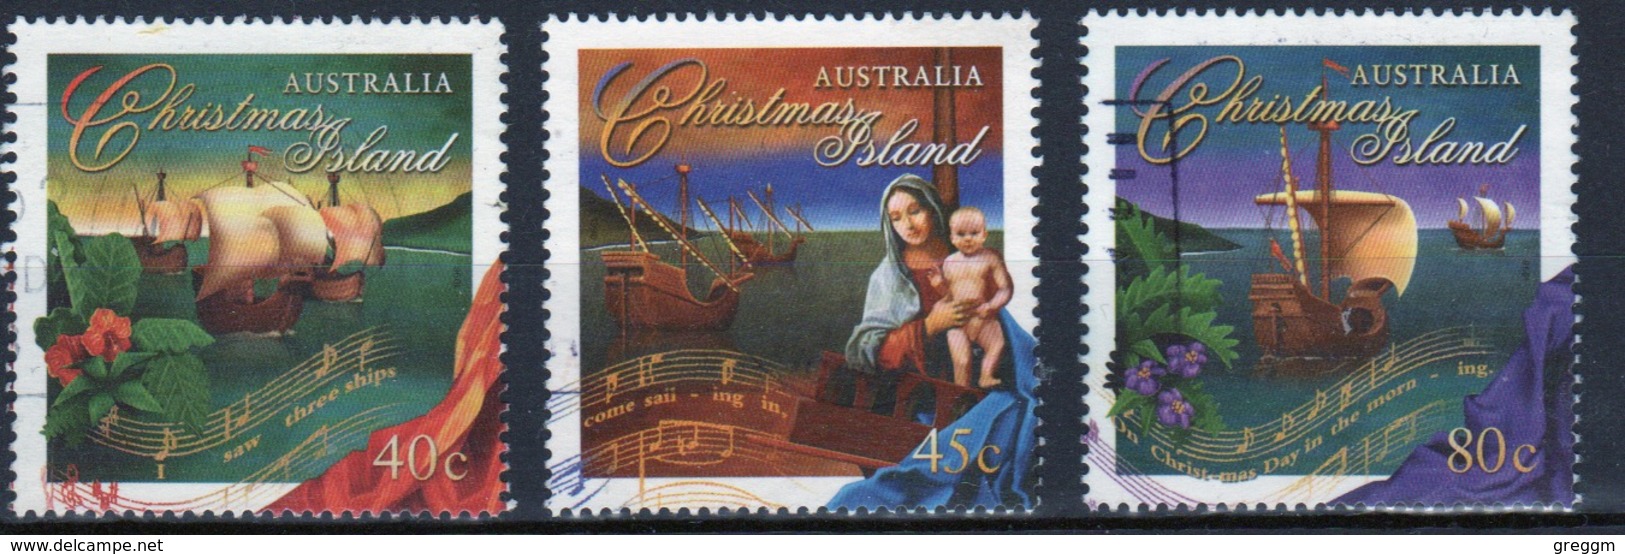 Christmas Island 1996 Set Of Stamps To Celebrate Christmas. - Christmas Island